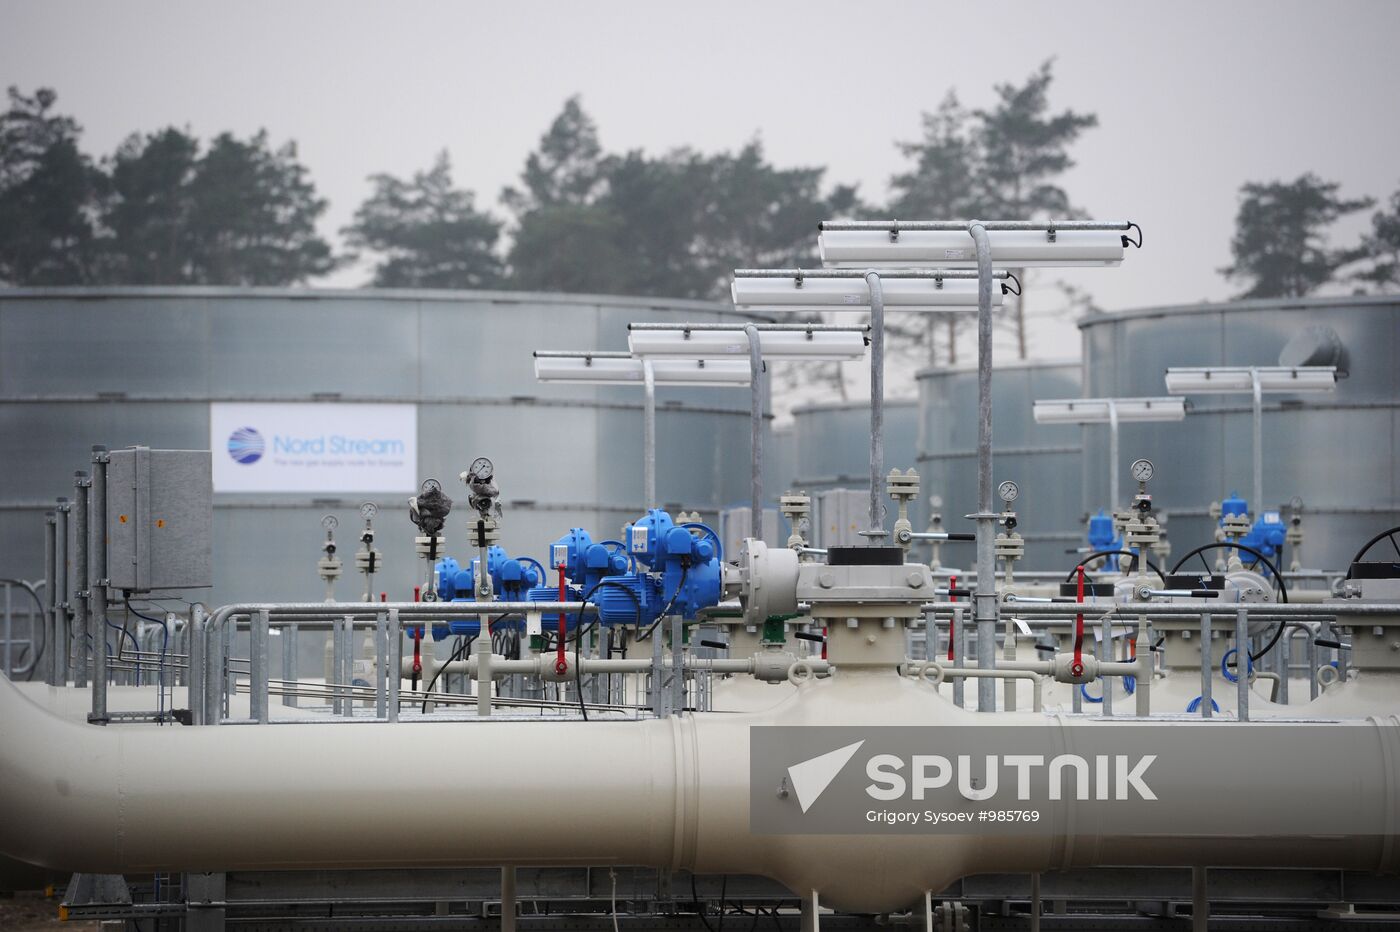 Nord Stream gas pipeline launched in Germany